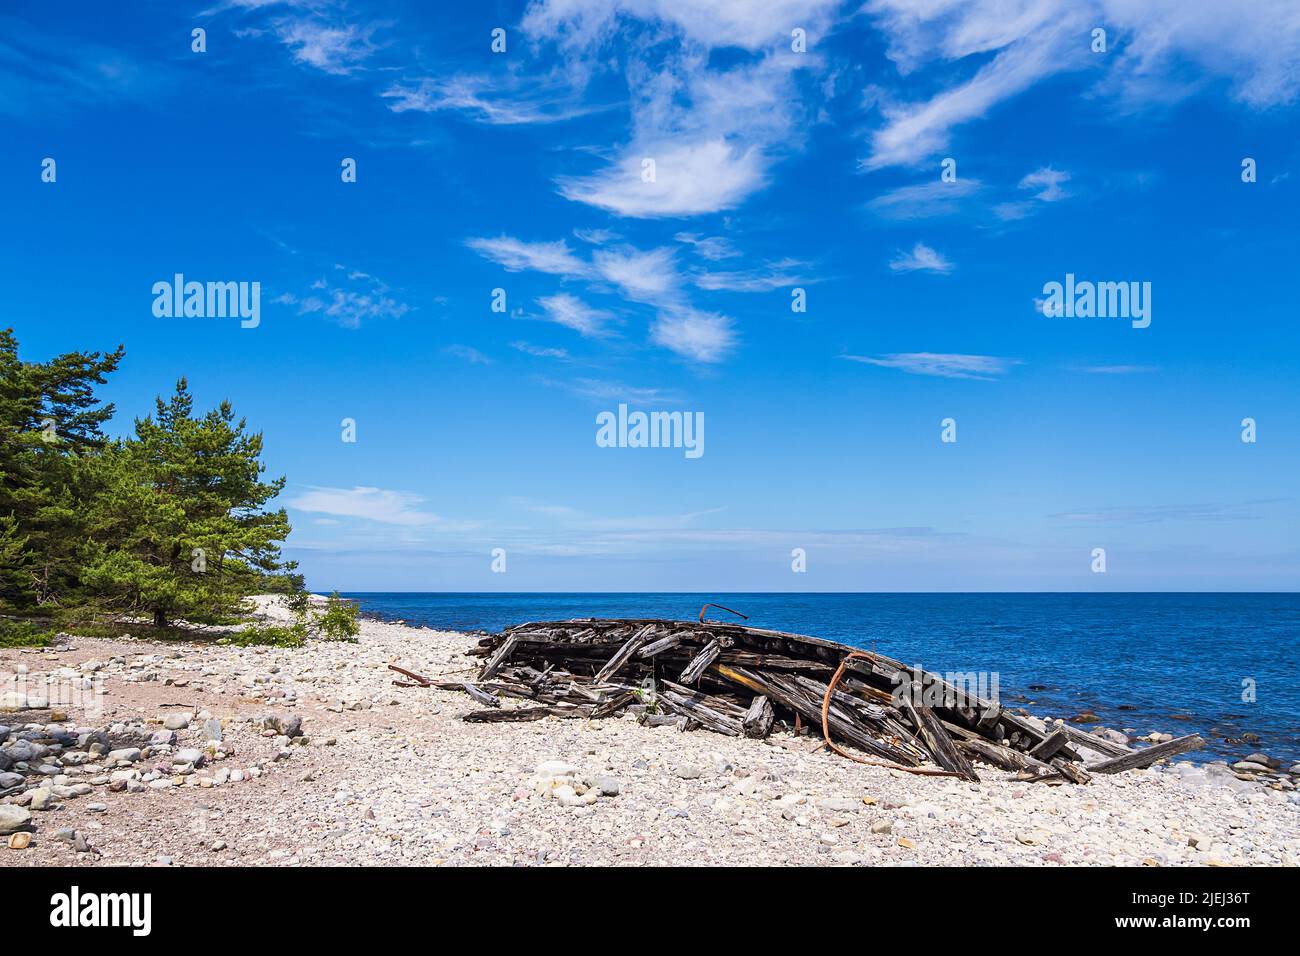 Historical shipwreck on the Baltic Sea coast on the island of Öland in Sweden. Stock Photo